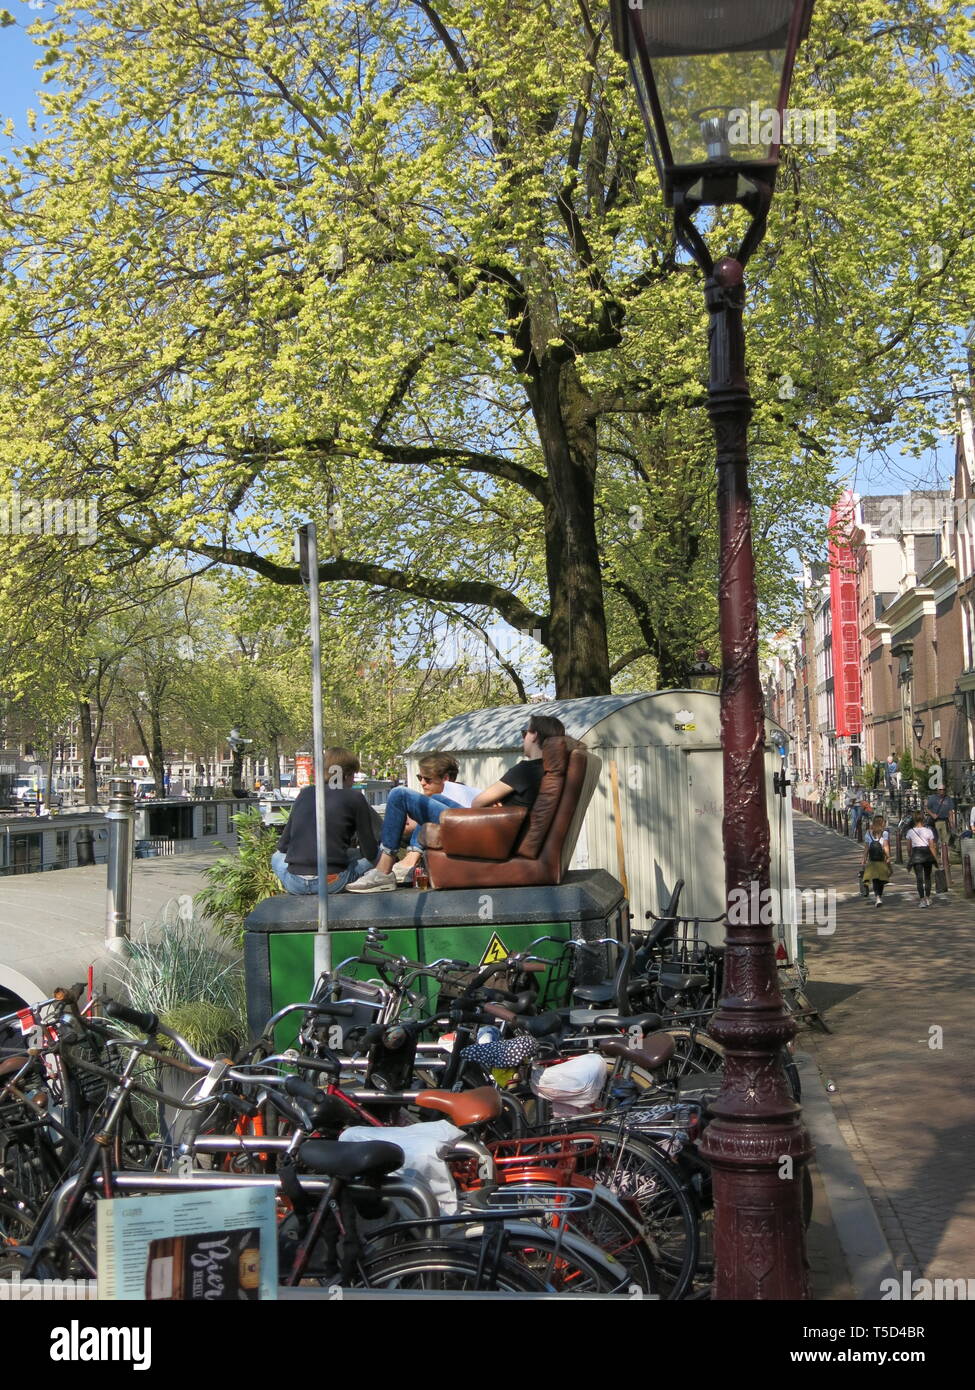 Three young men sitting on an old leather sofa on top of a roadside cabinet abandoned amongst parked bicycles at the side of the canal in Amsterdam Stock Photo